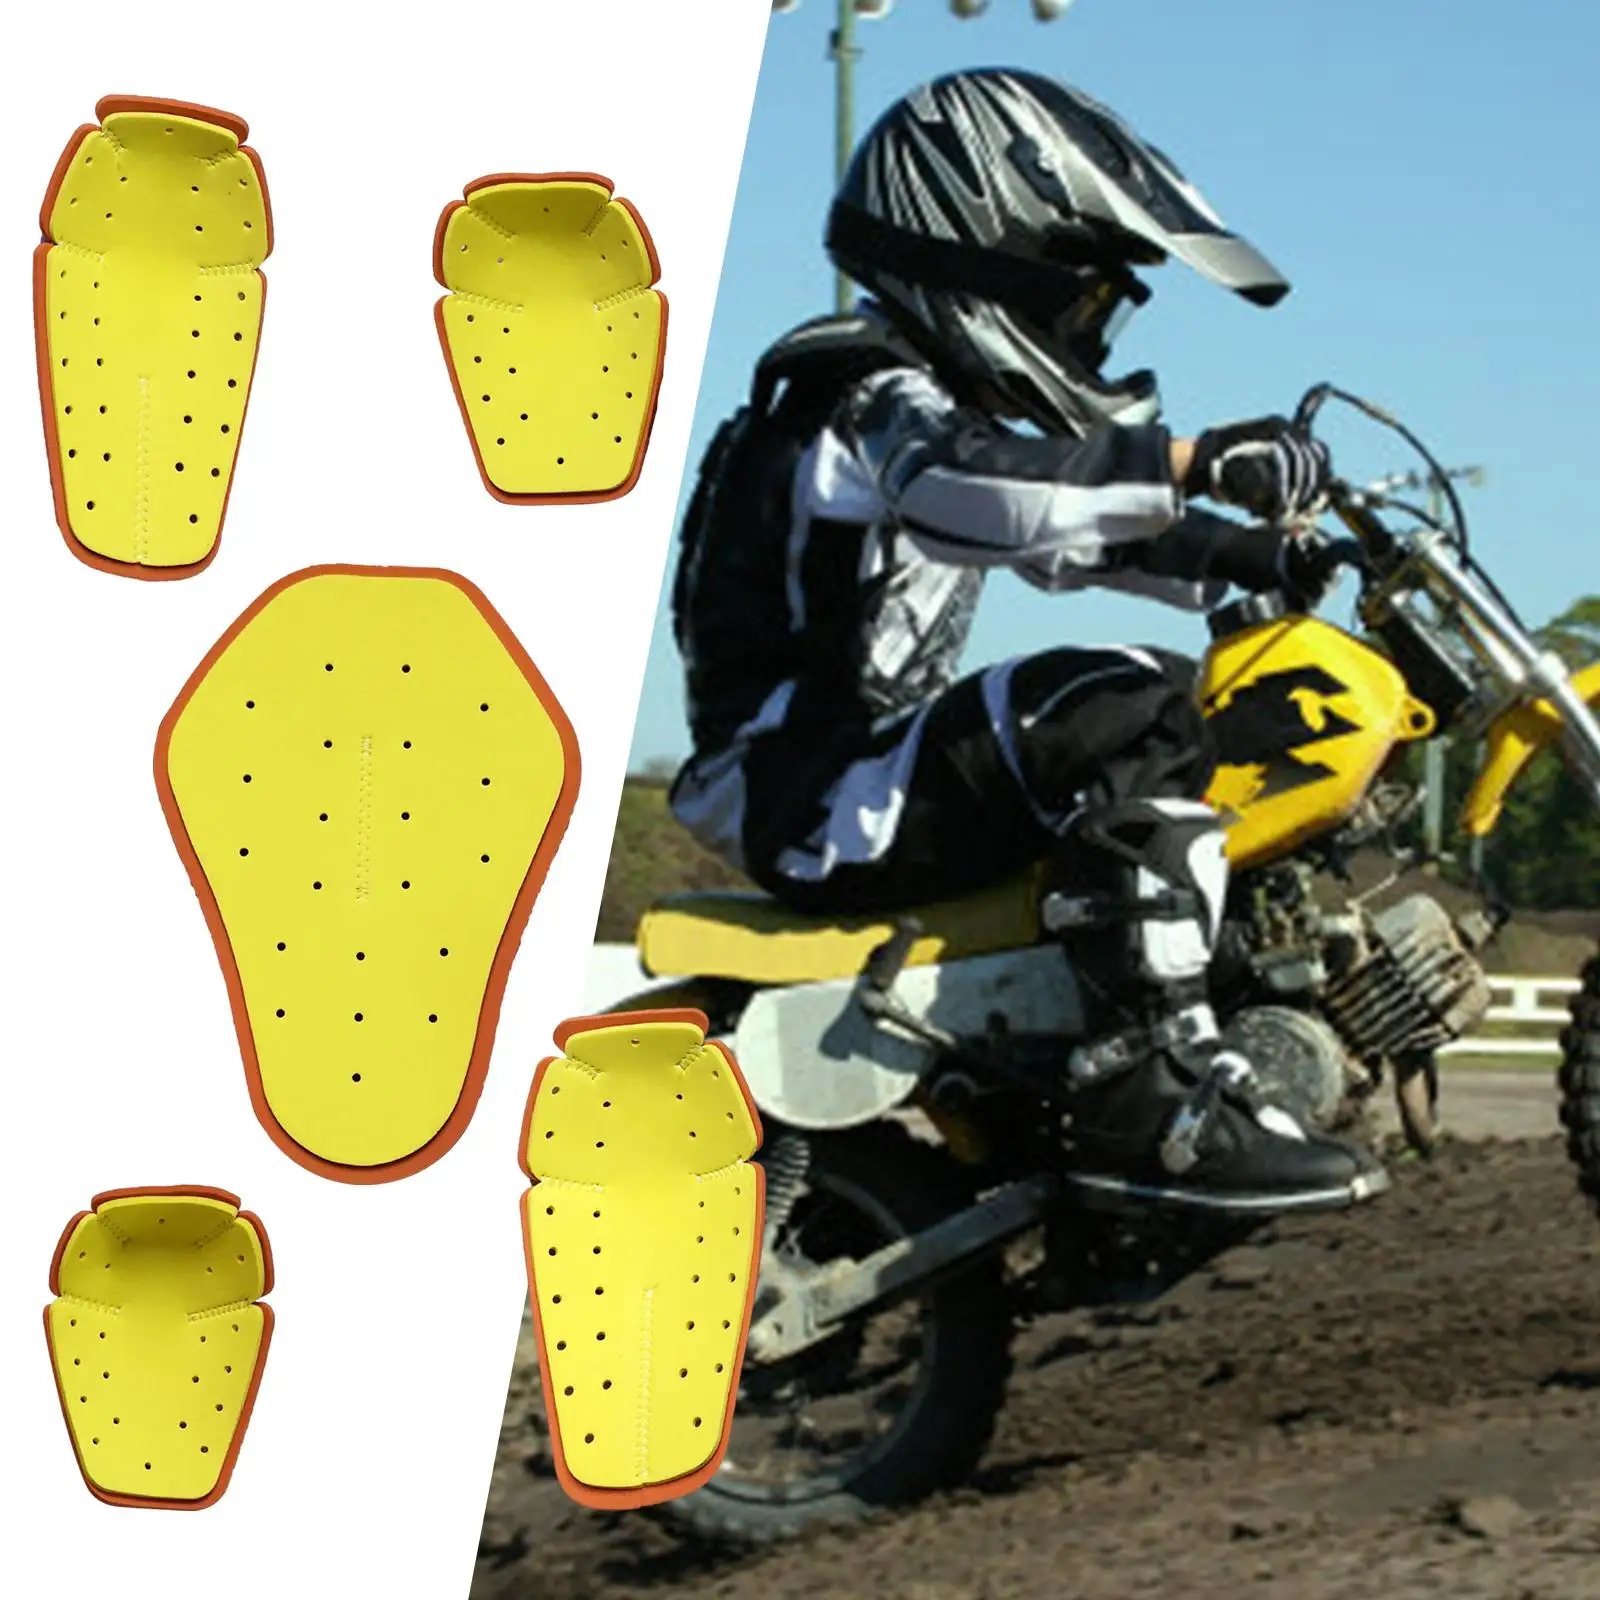 Motorbike Protection Pad Motorbike Body Protective Gear for Cycling Motocross